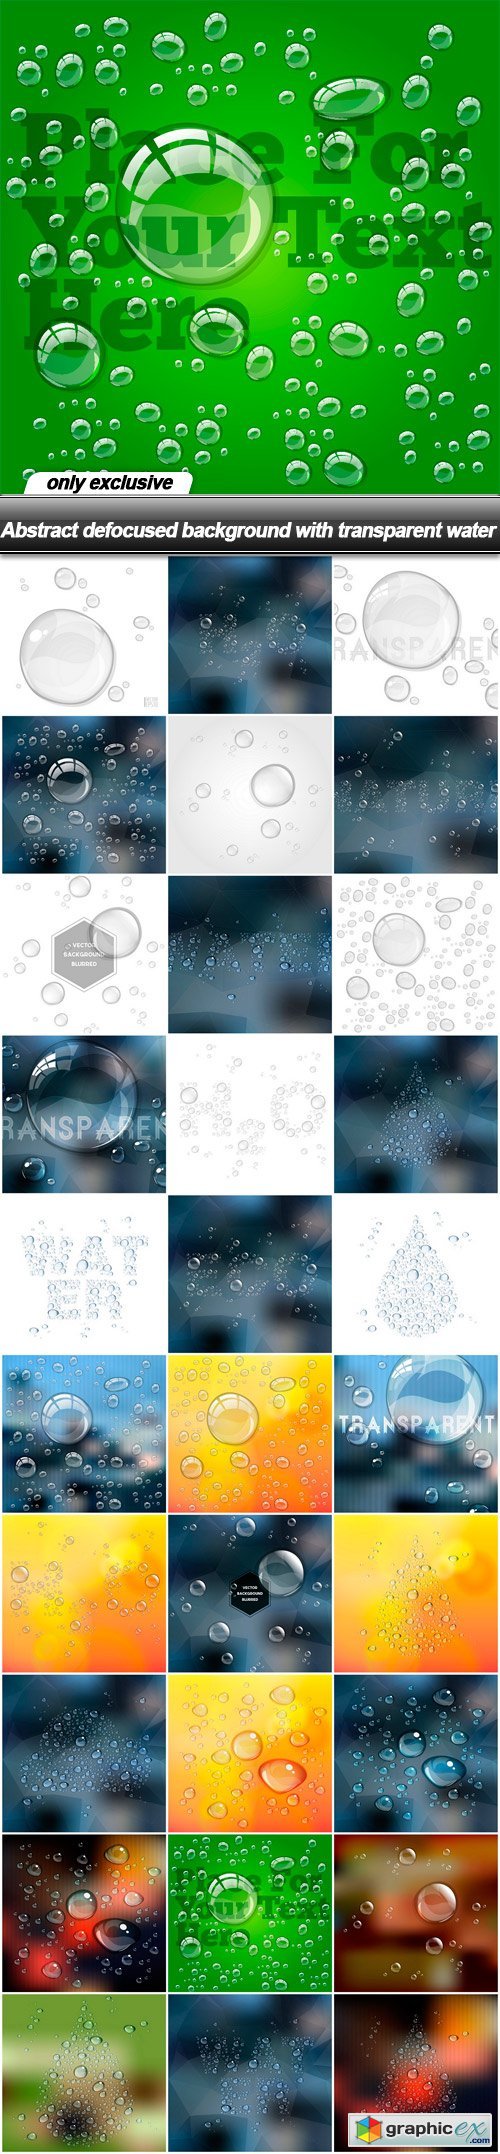 Abstract defocused background with transparent water - 30 EPS